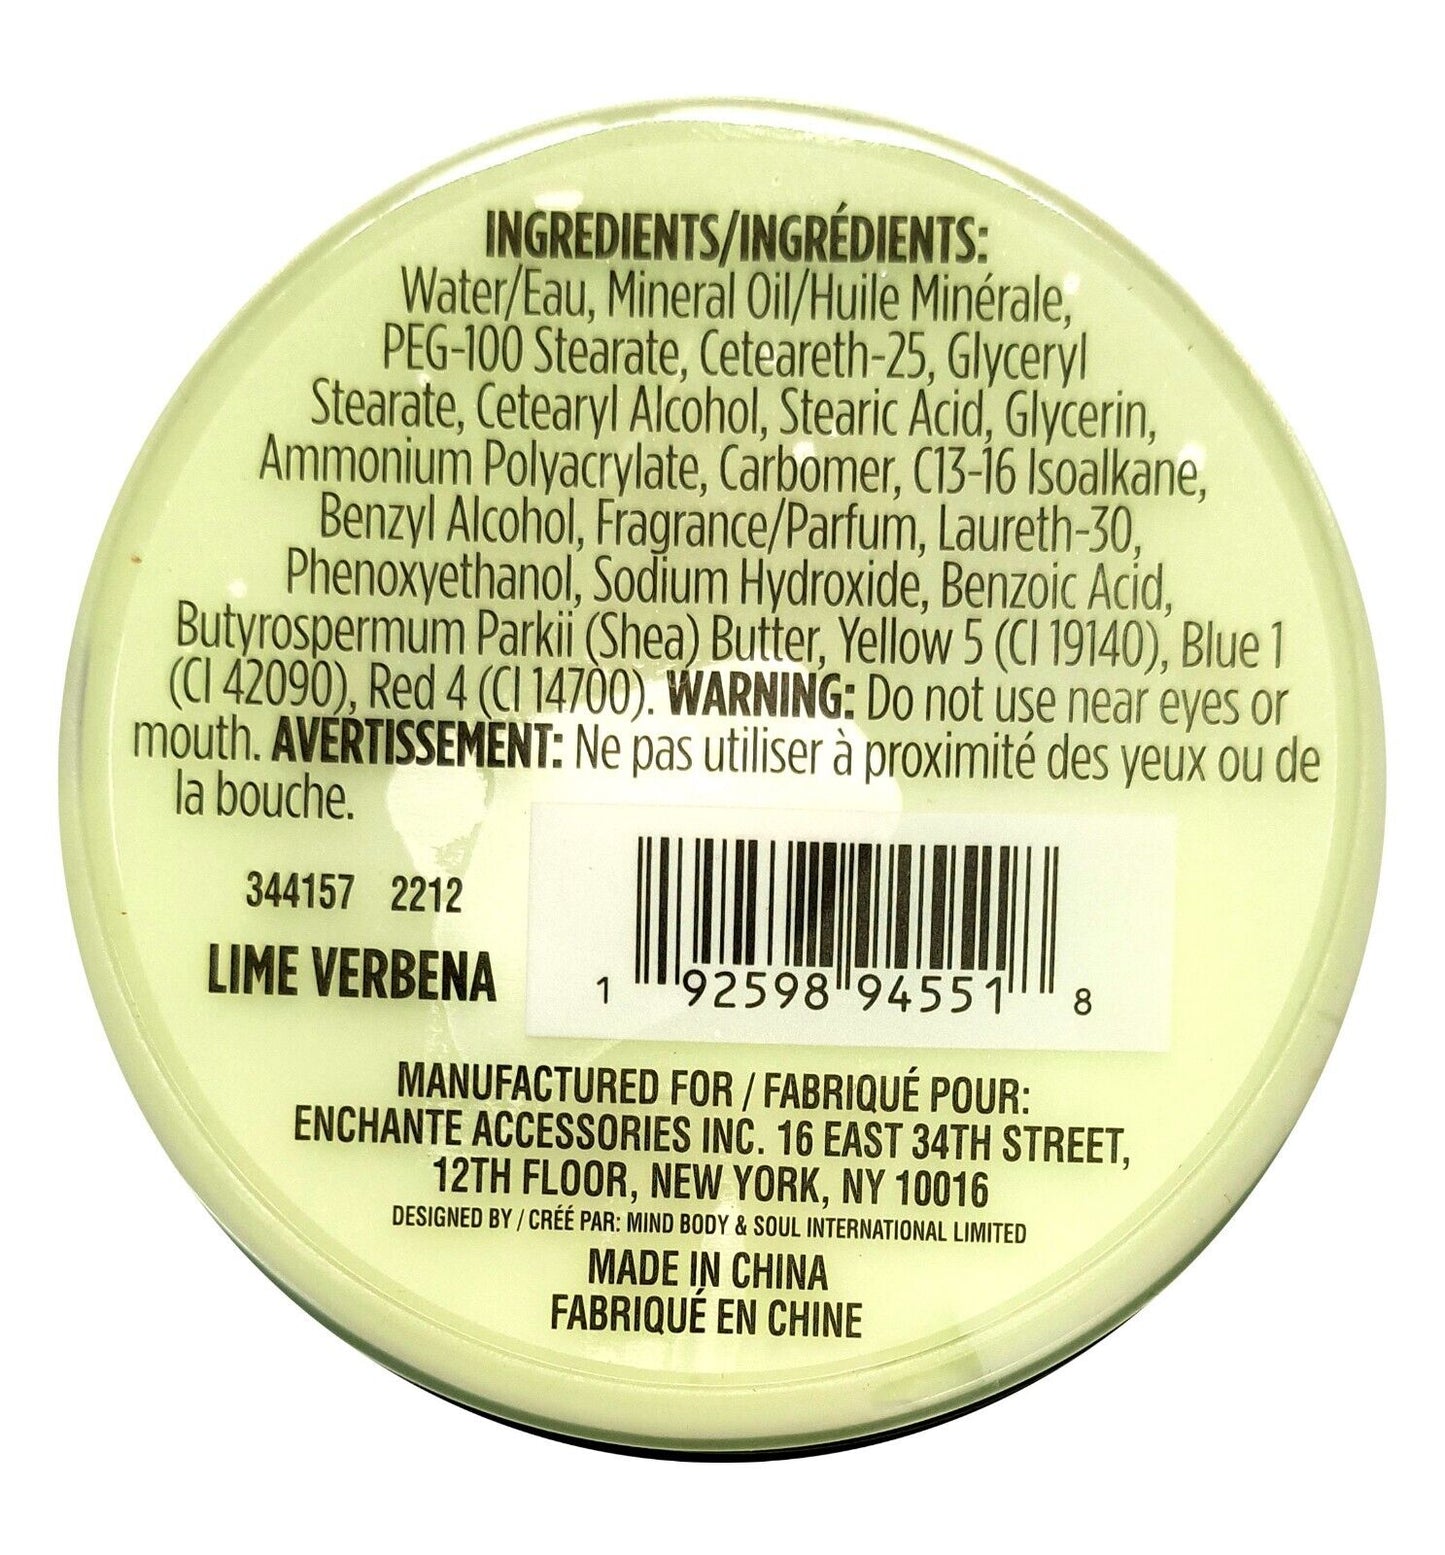 Aromatherapy Body Butter - Lime Verbena Scented - Luxury Skin Care 3.4fl